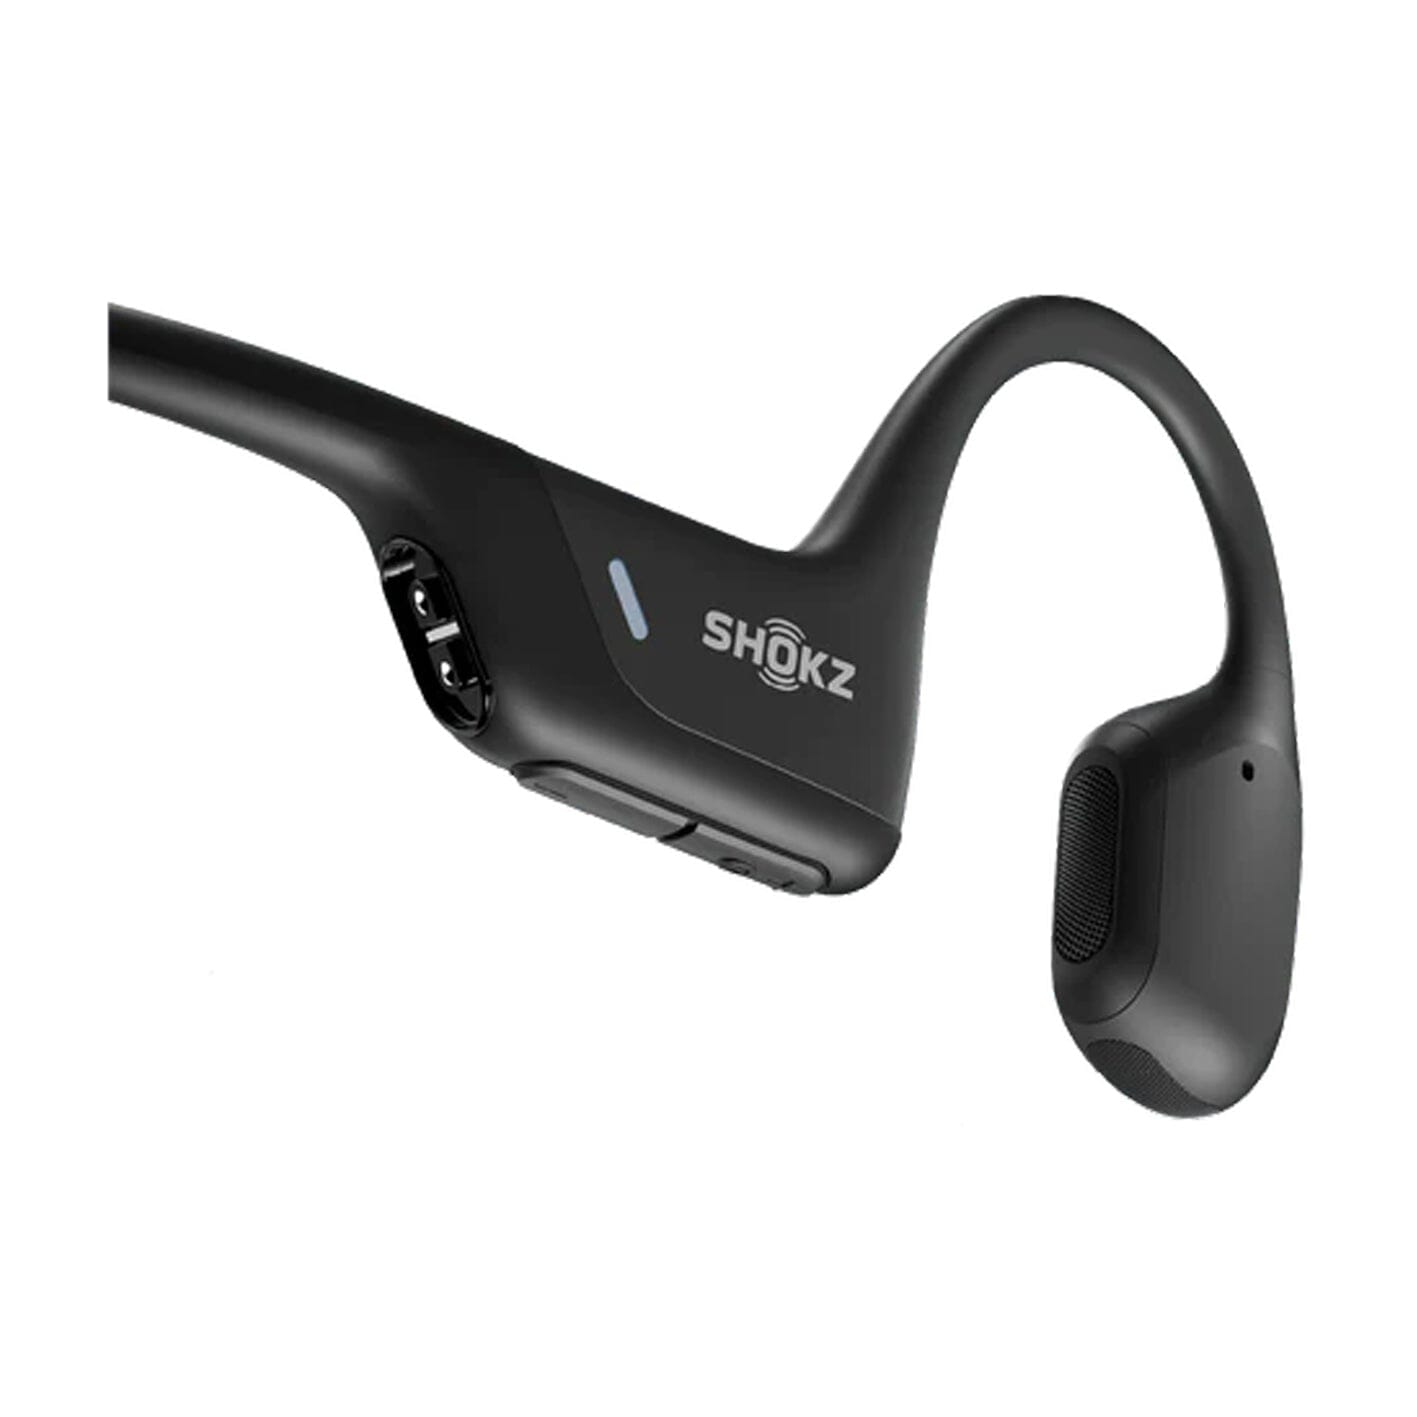 SHOKZ OpenRun Pro Mini - Premium Bone Conduction Open-Ear Bluetooth Sport Headphones - Sweat Resistant Wireless Earphones for Workouts and Running with Deep Base - Built-in Mic, with Headband ONE2WORLD 